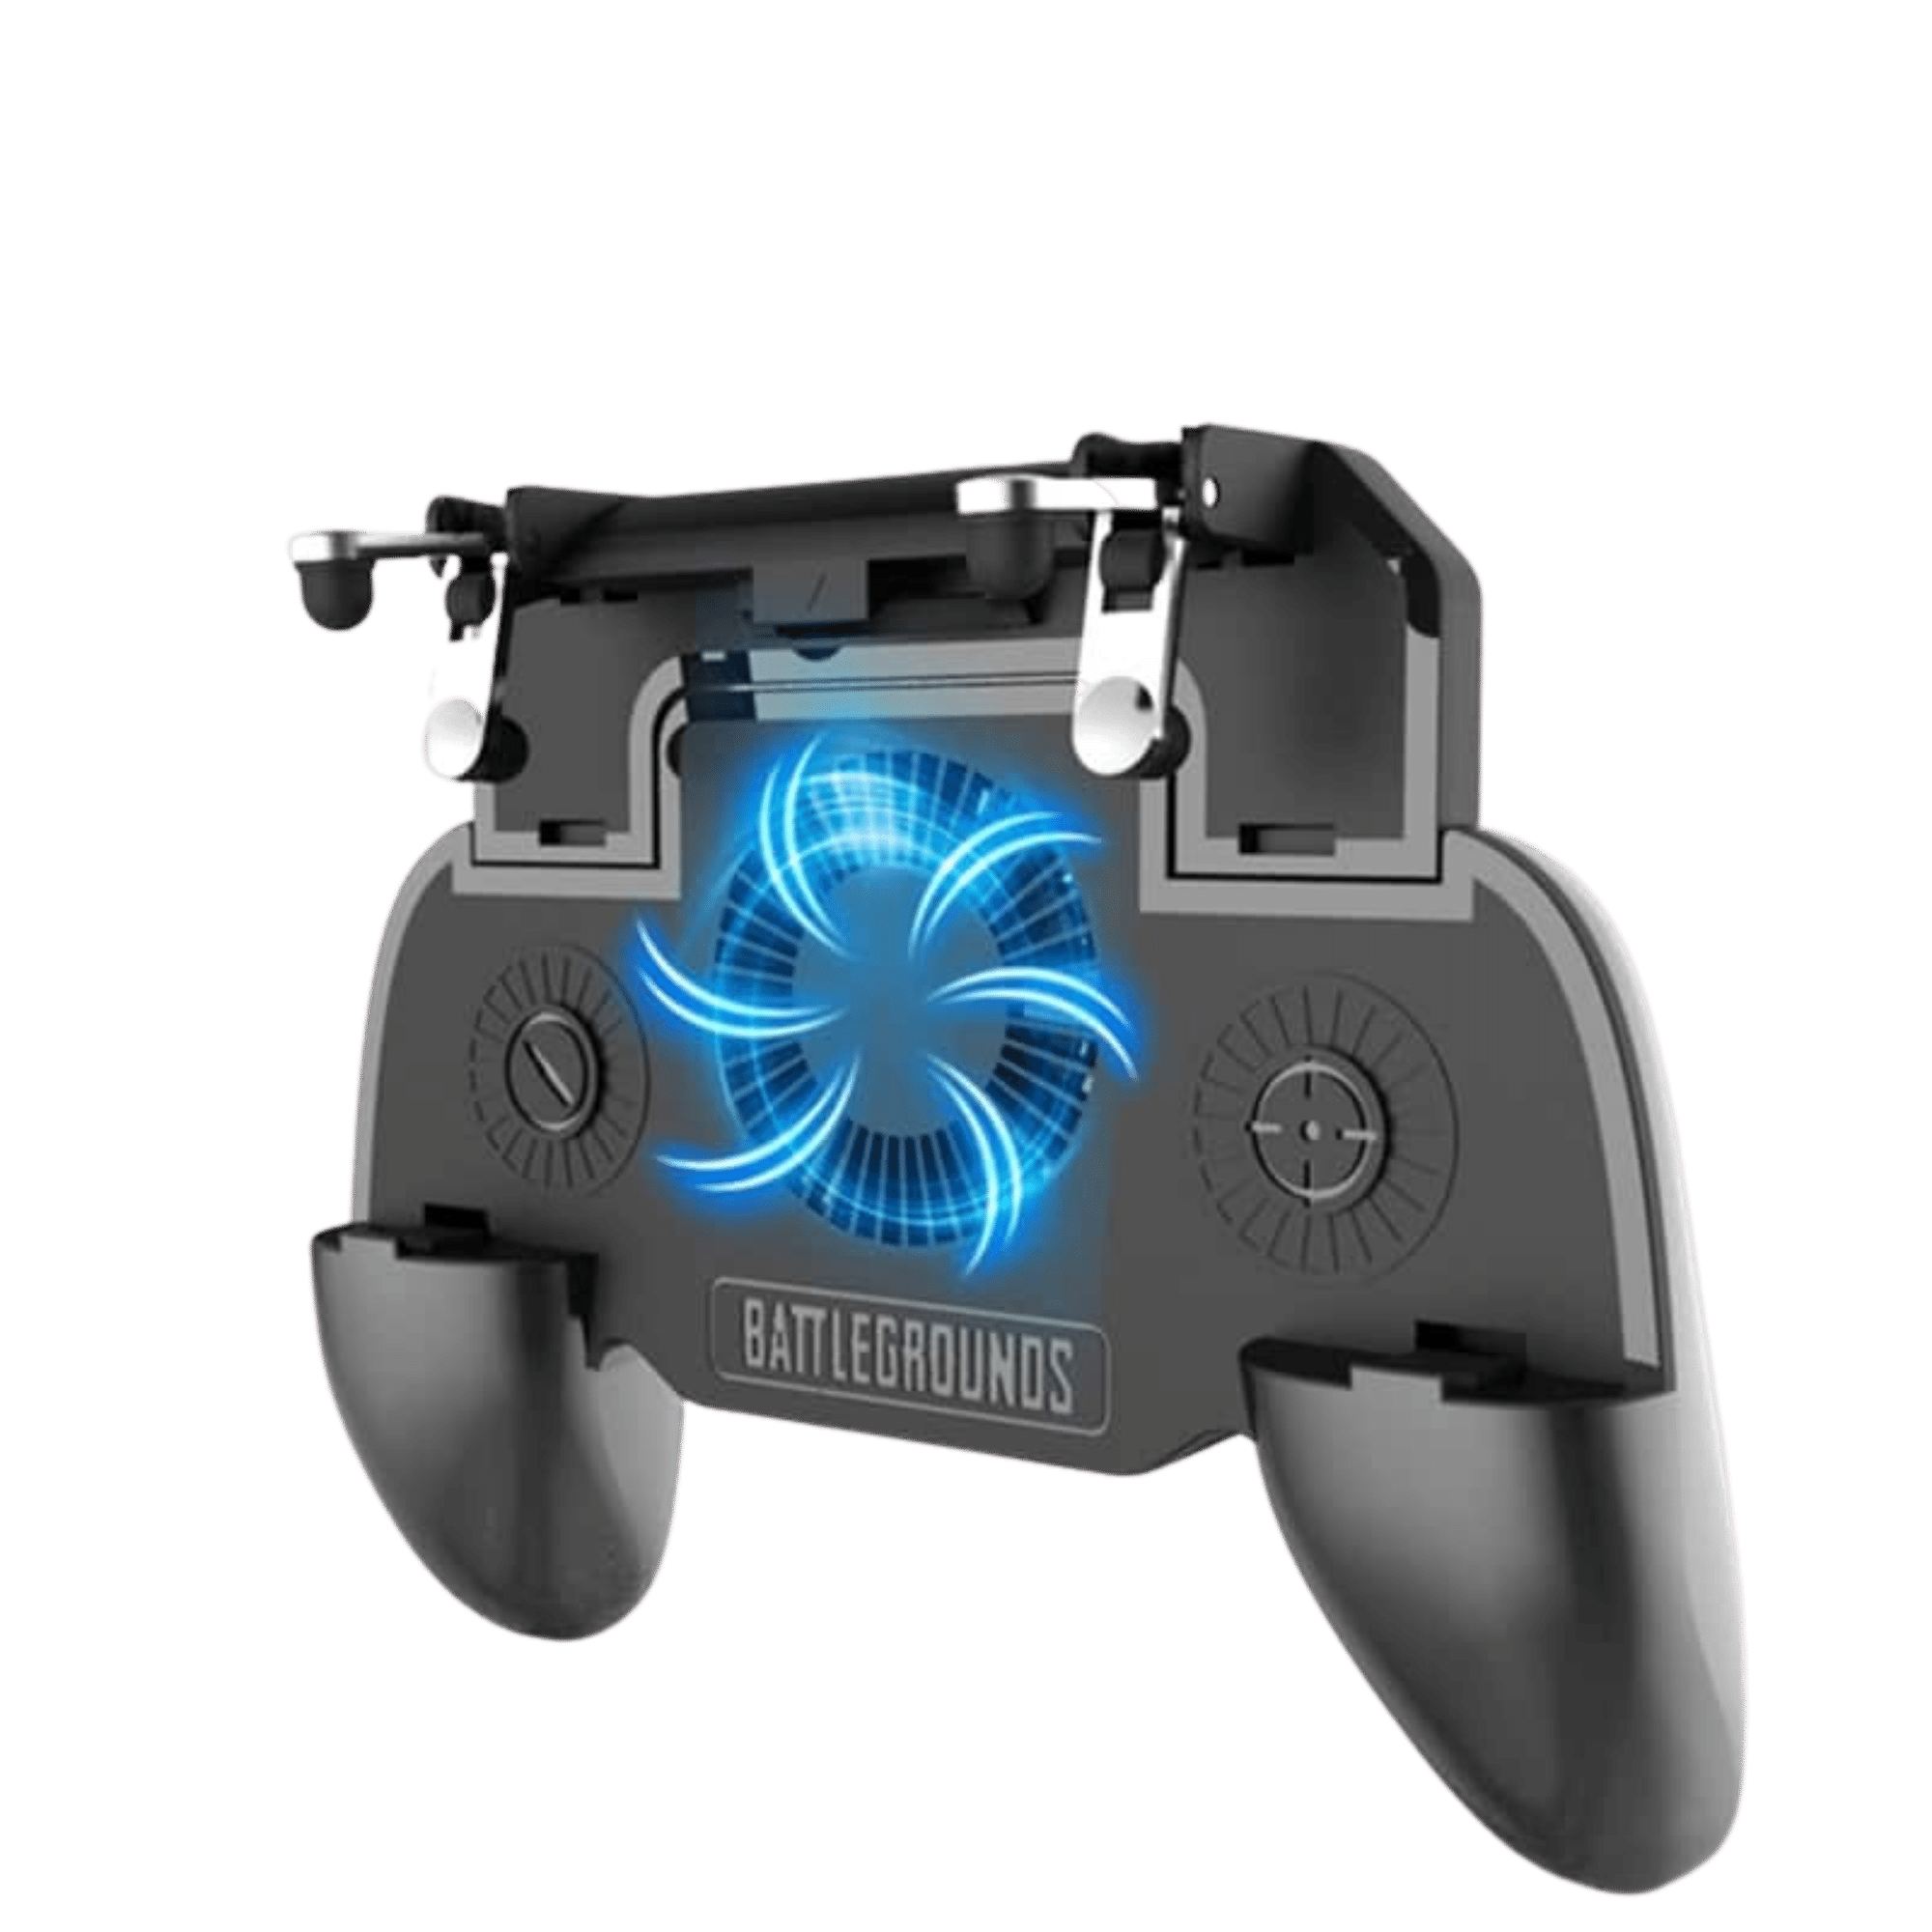 SR PUBG Mobile gaming Controller Game-pad with a Cooling Fan and Power Bank - ErkamsGadgetStore